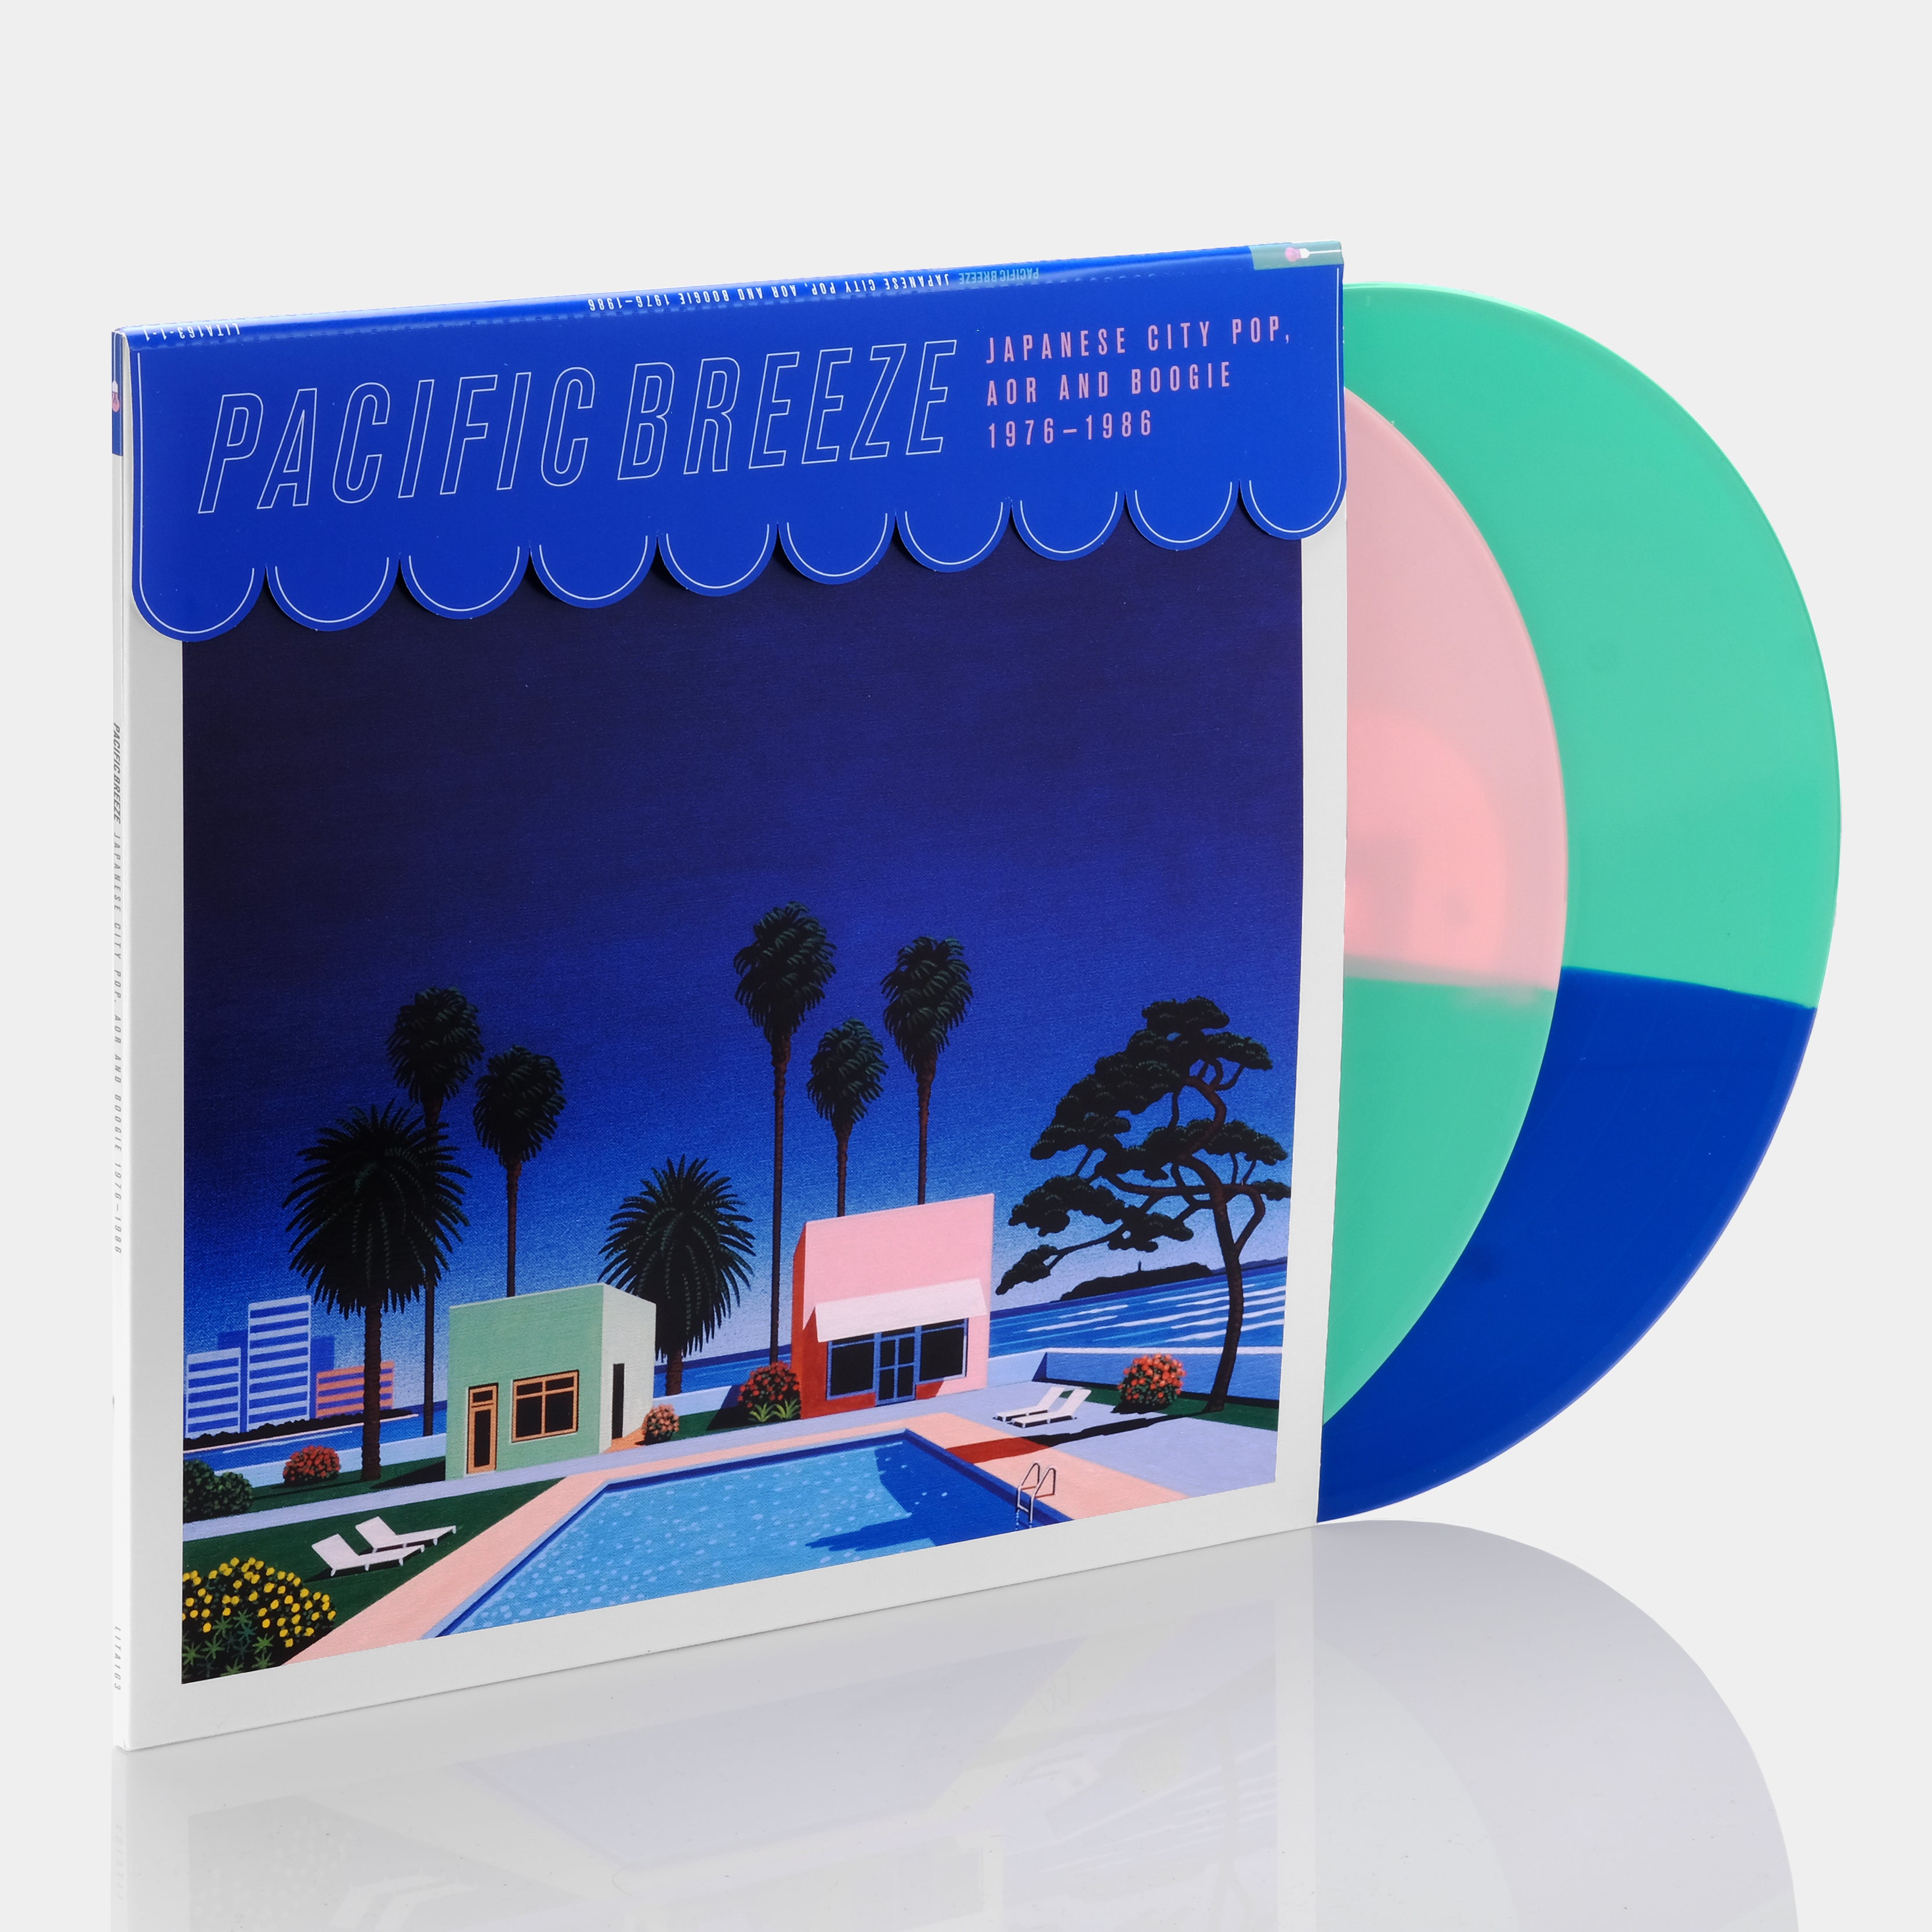 Pacific Breeze - Japanese City Pop, AOR And Boogie 1976-1986 2xLP Tricolor Vinyl Record